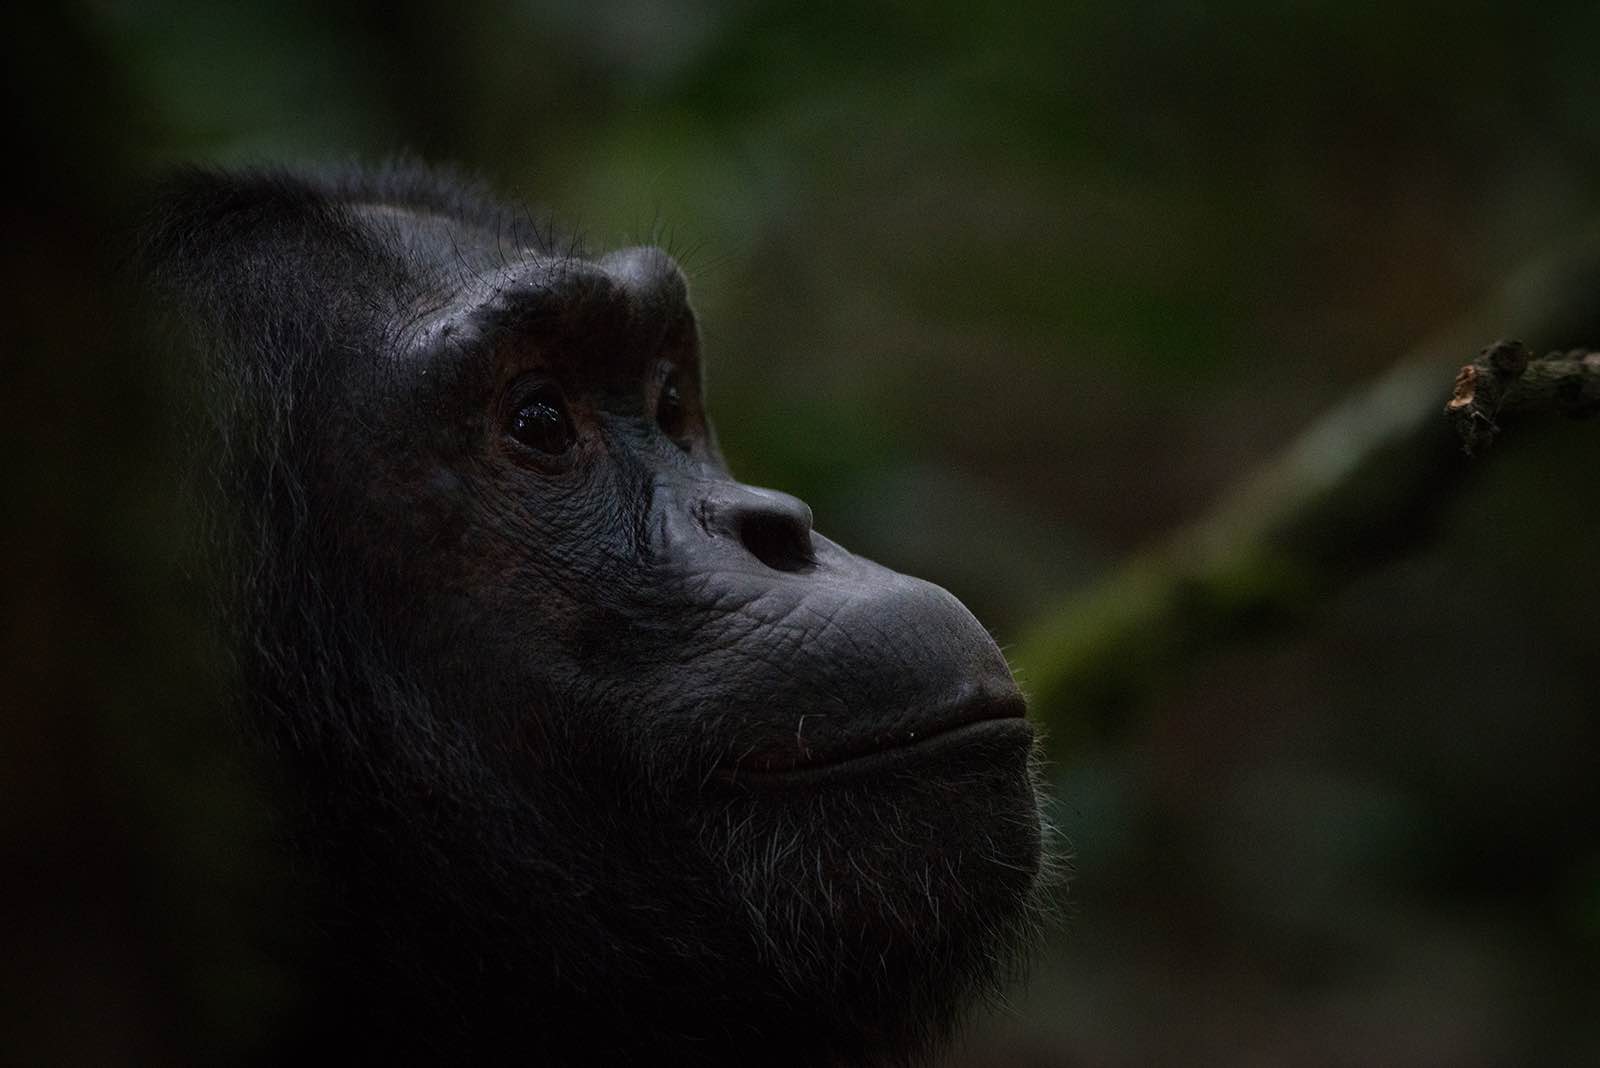 Profile of a chimpanzee in the green forest